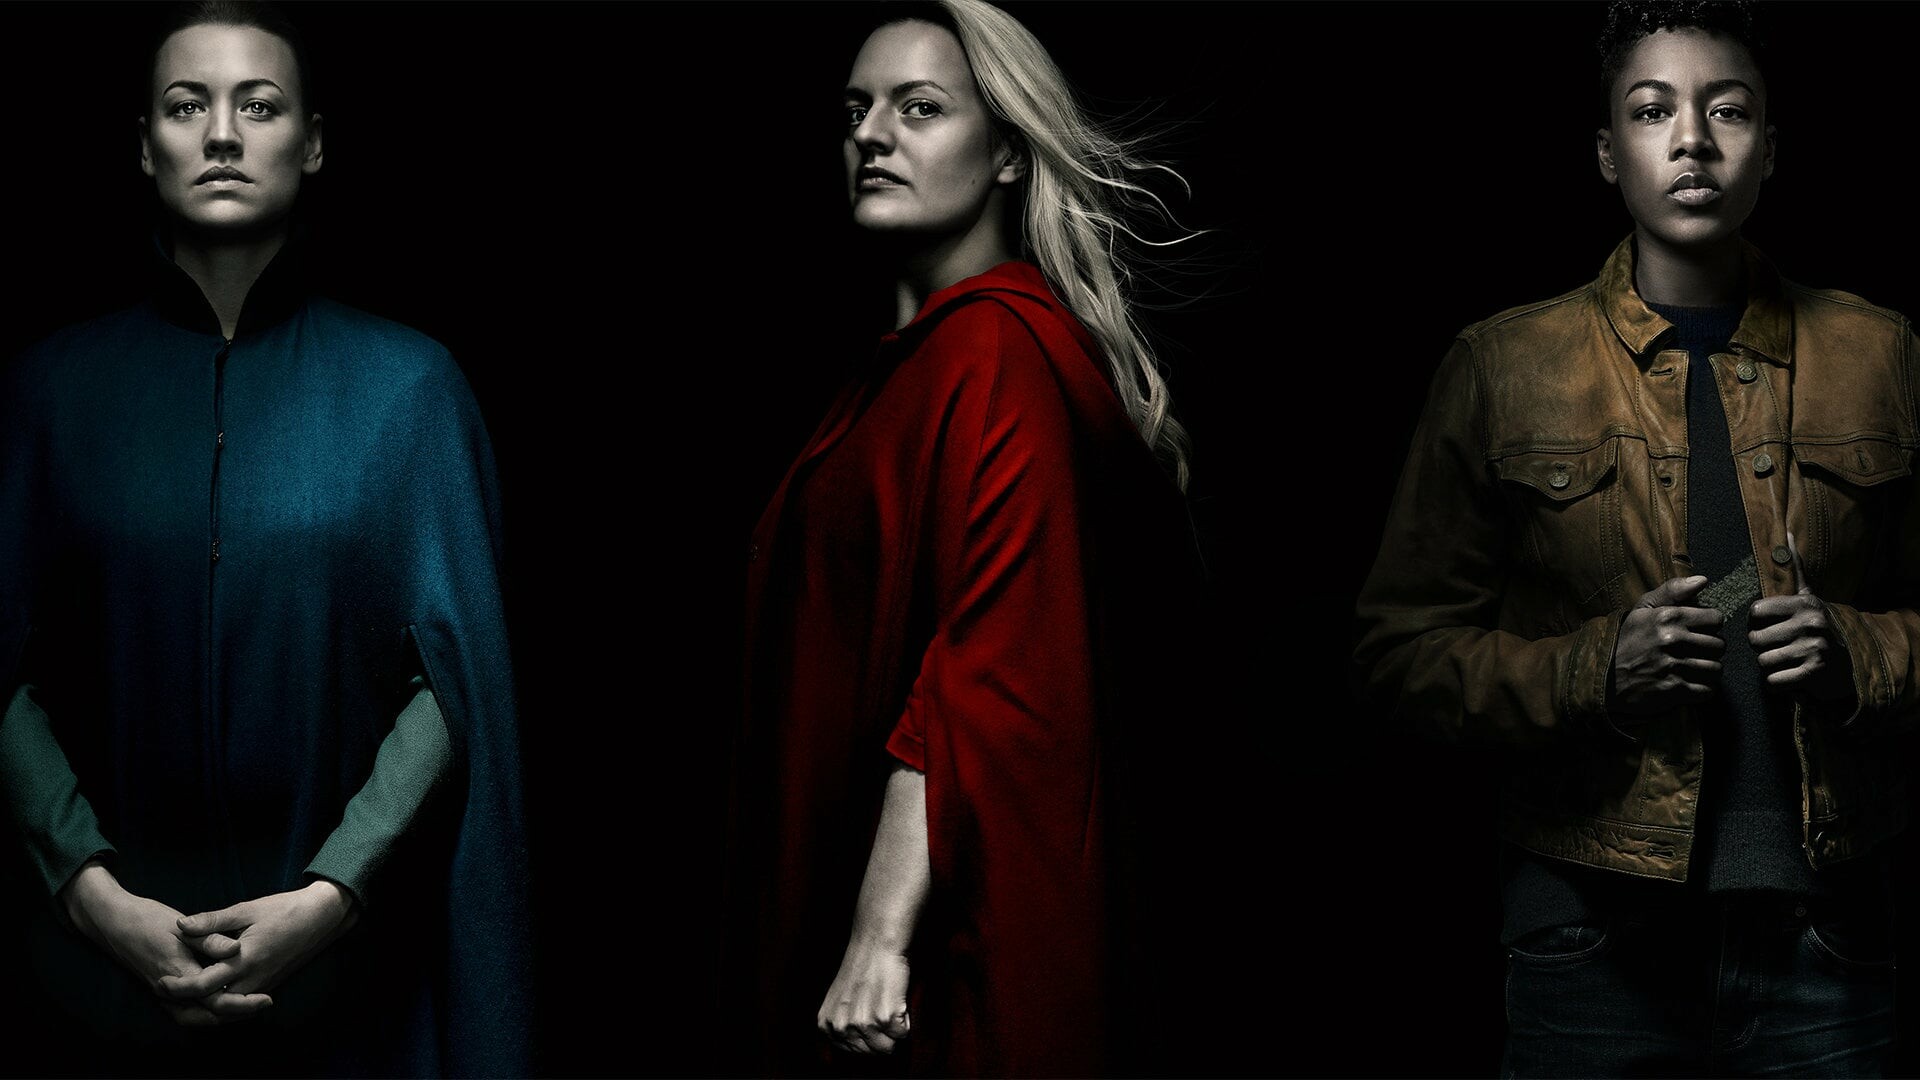 The Handmaid's Tale: The new Hulu television series, Margaret Atwood's dystopian novel. 1920x1080 Full HD Background.